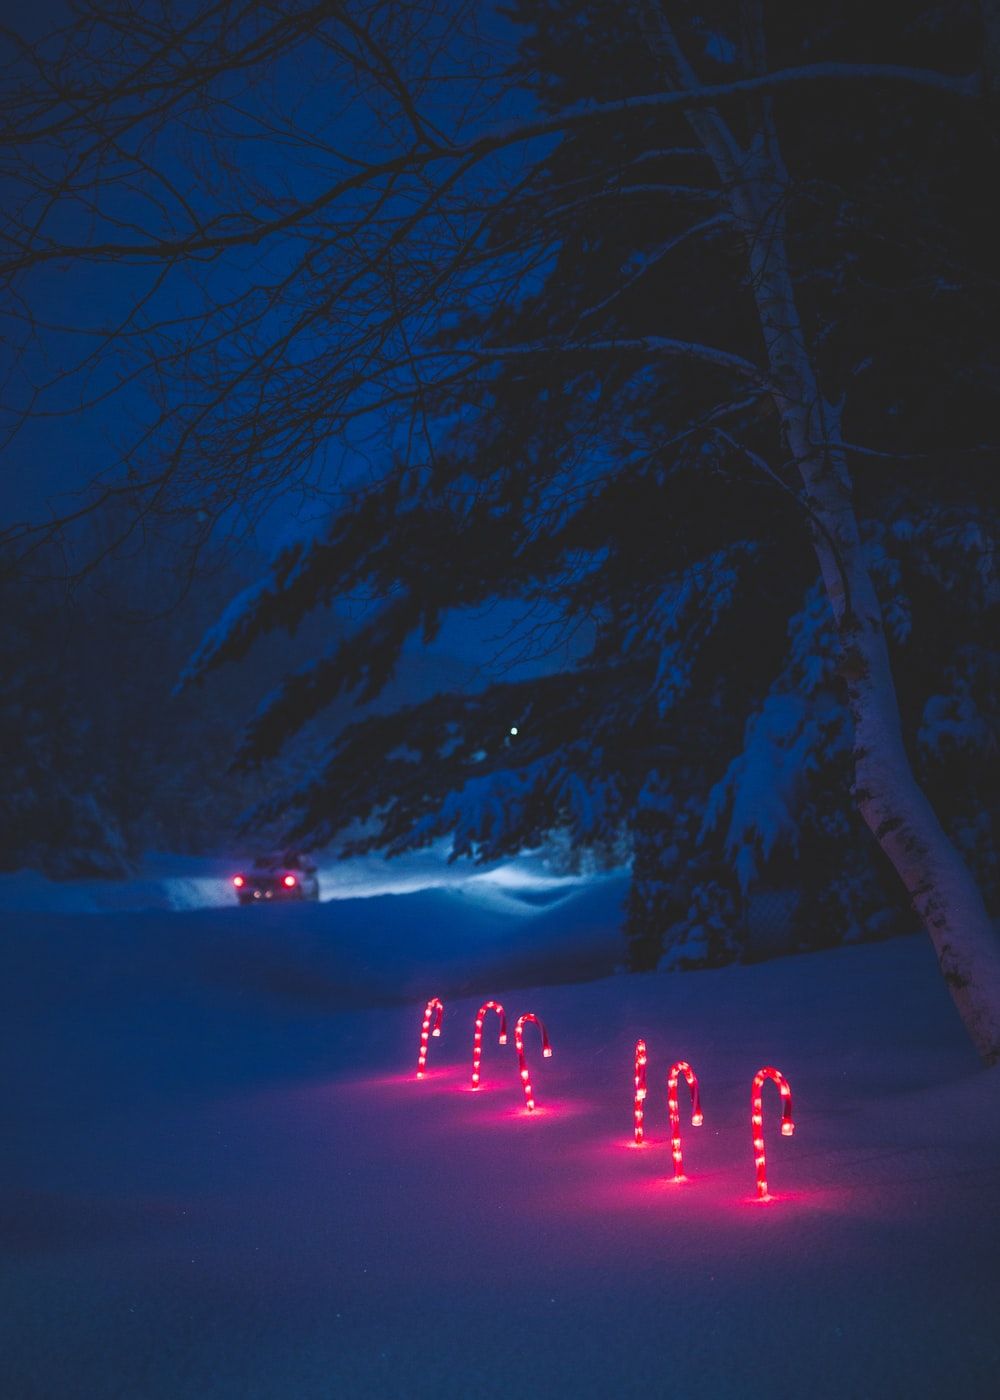 Winter Night Picture. Download Free Image